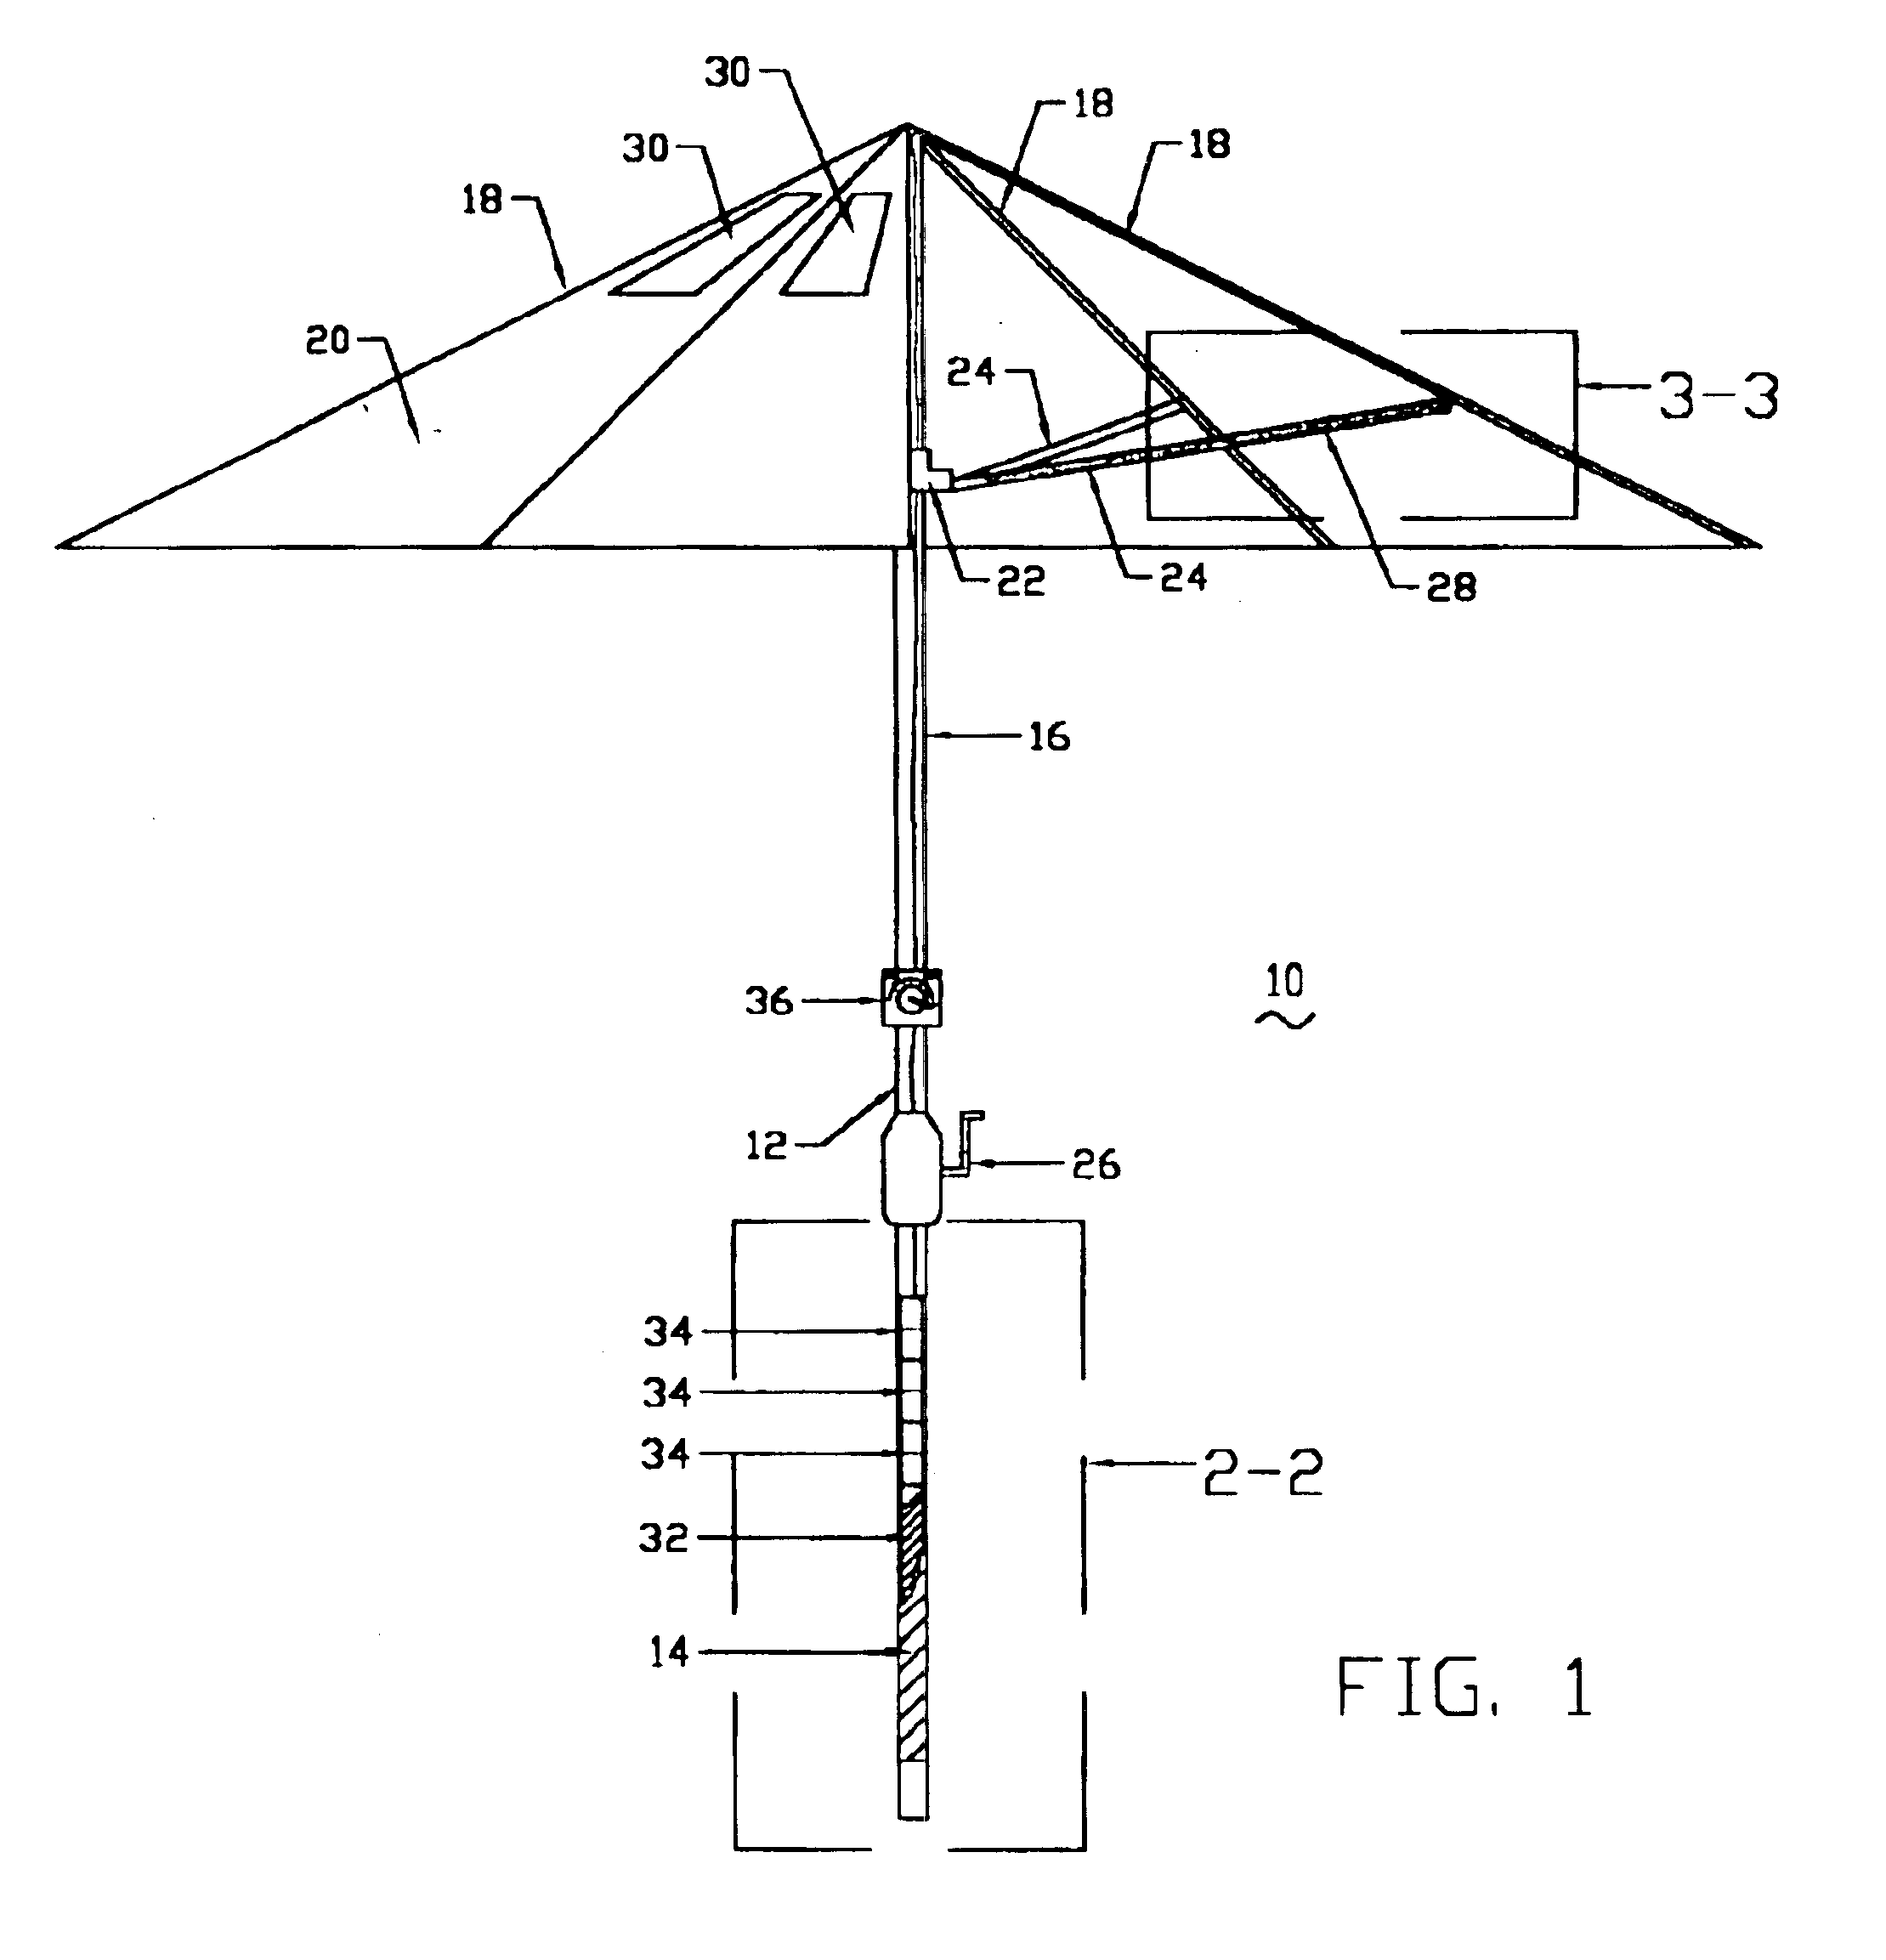 Illuminated umbrella assembly having self-contained and replacable lighting